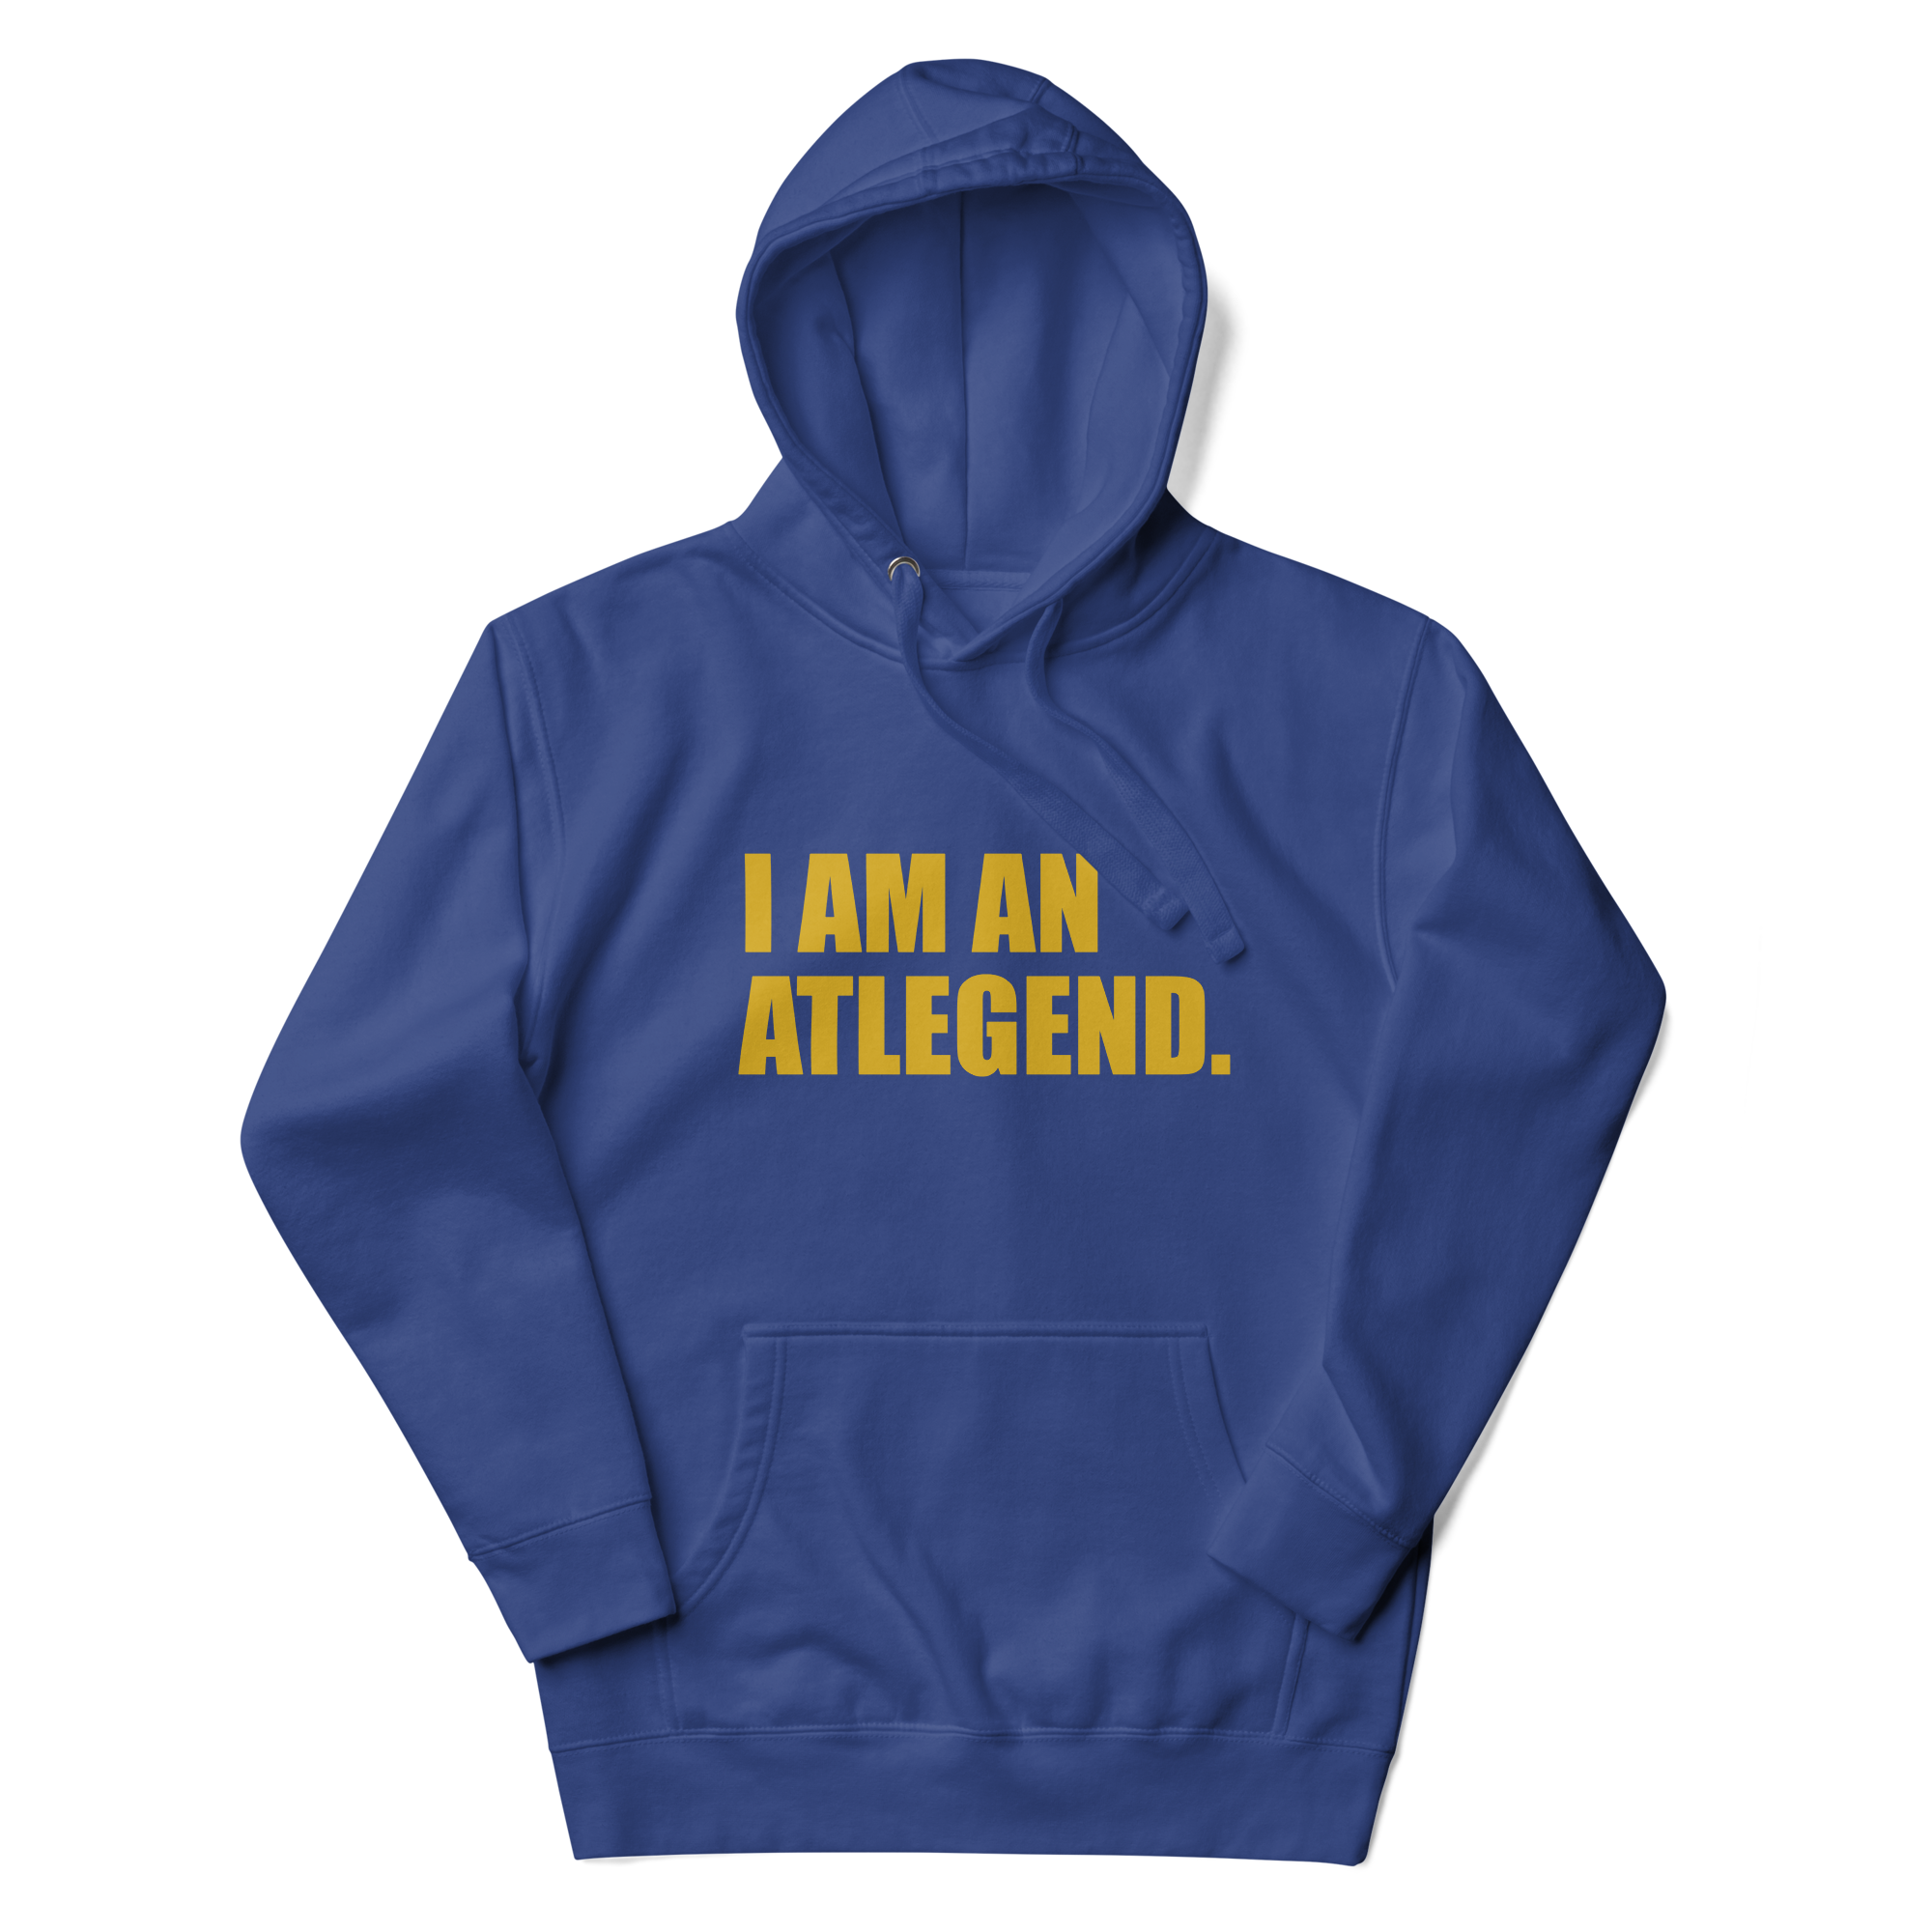 I AM AN ATLEGEND: HBCU | FORT VALLEY STATE HOODIE